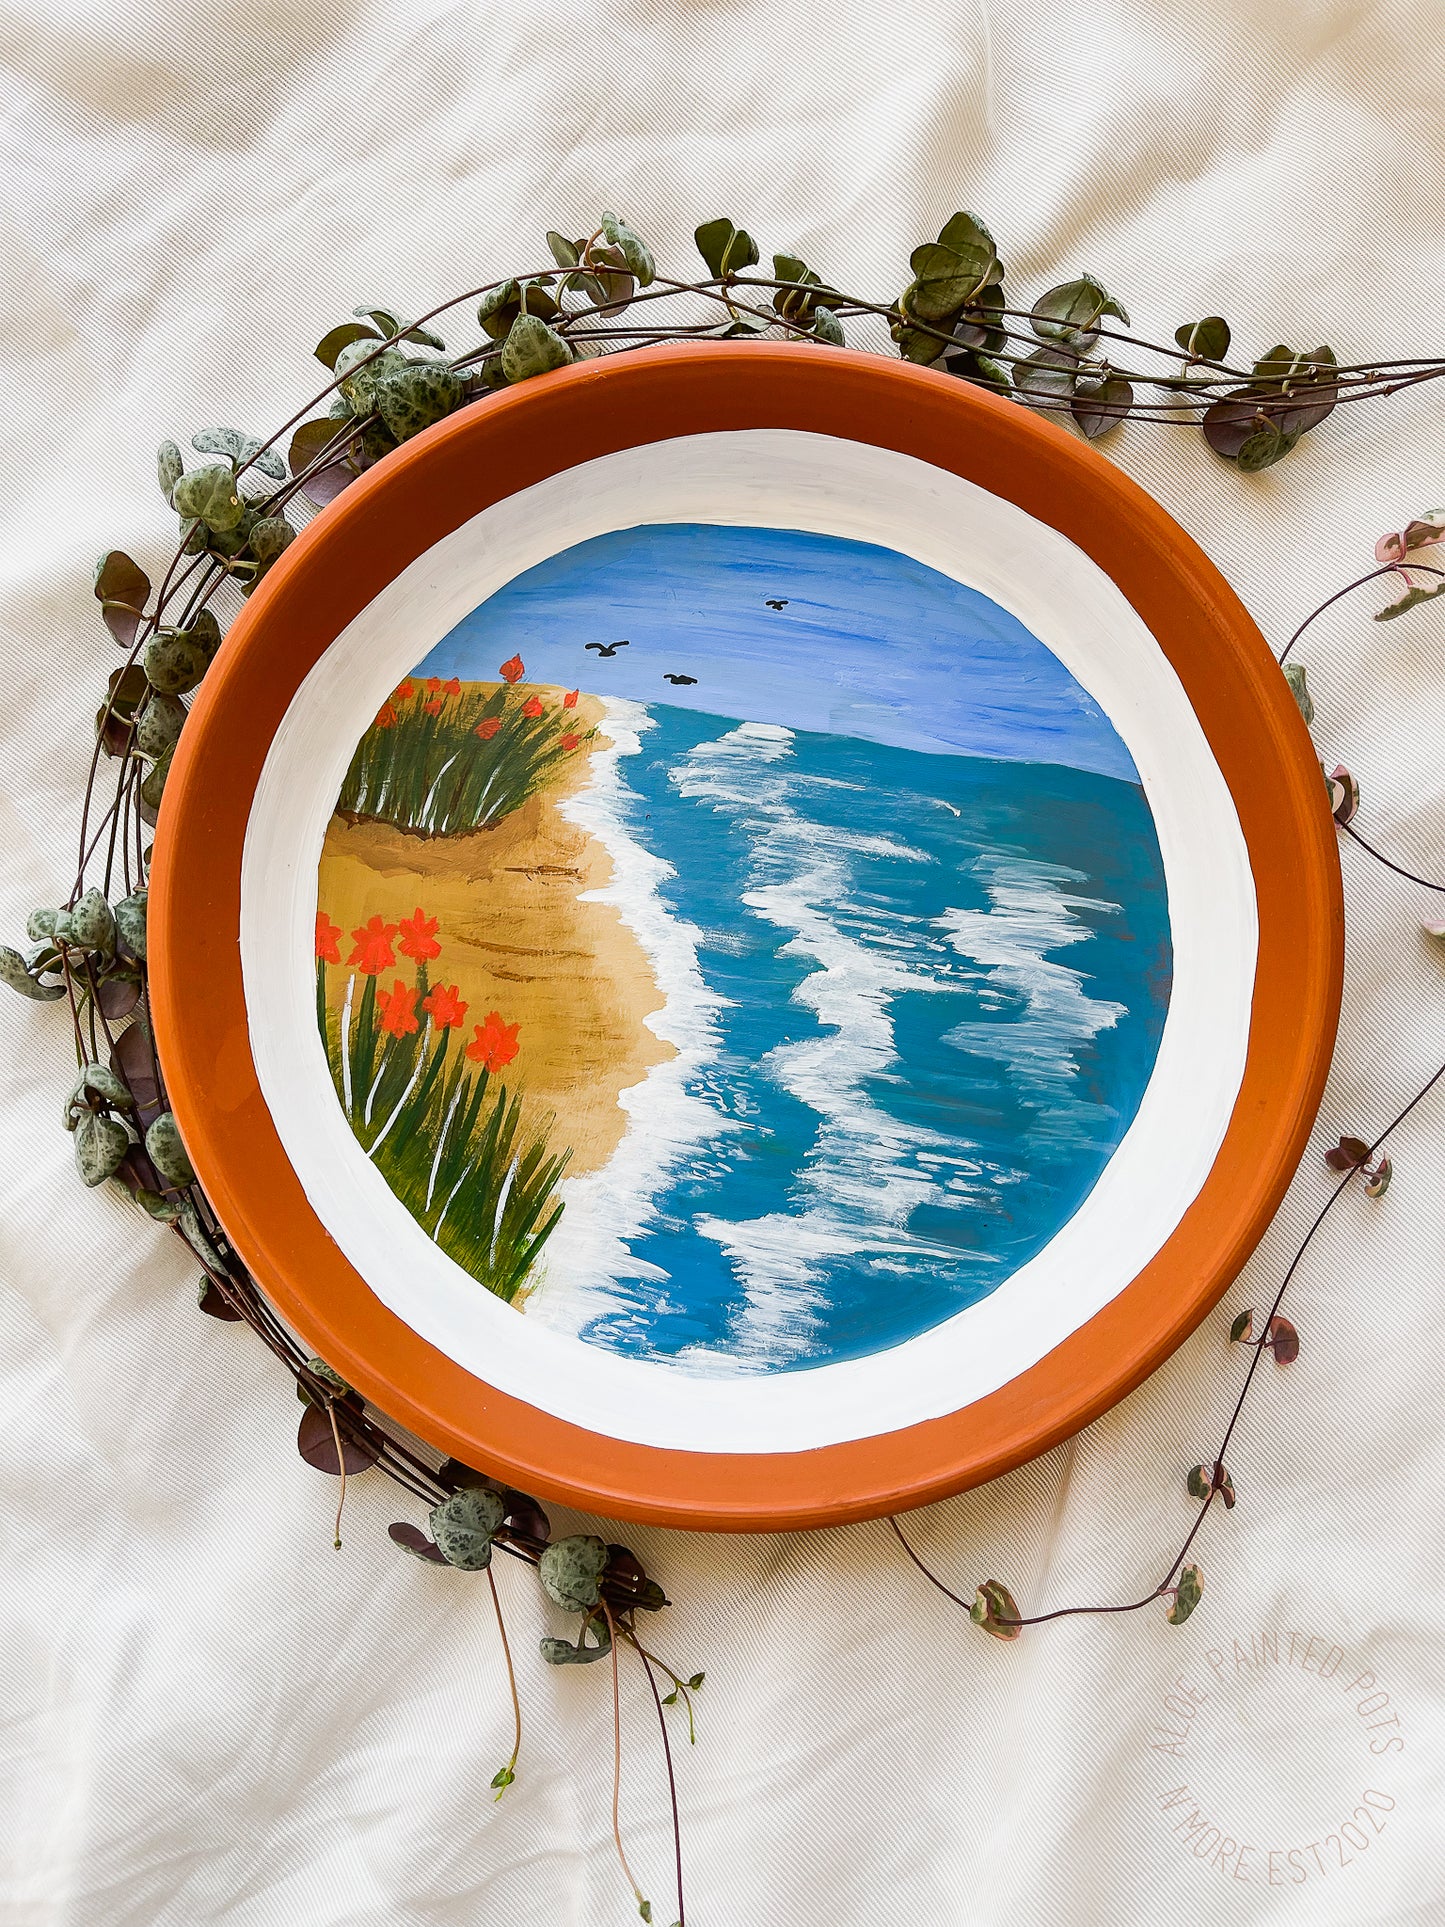 By The Sea Saucer Tray for Jewelries and Accessories | Hand Painted Saucer | Ready to Ship